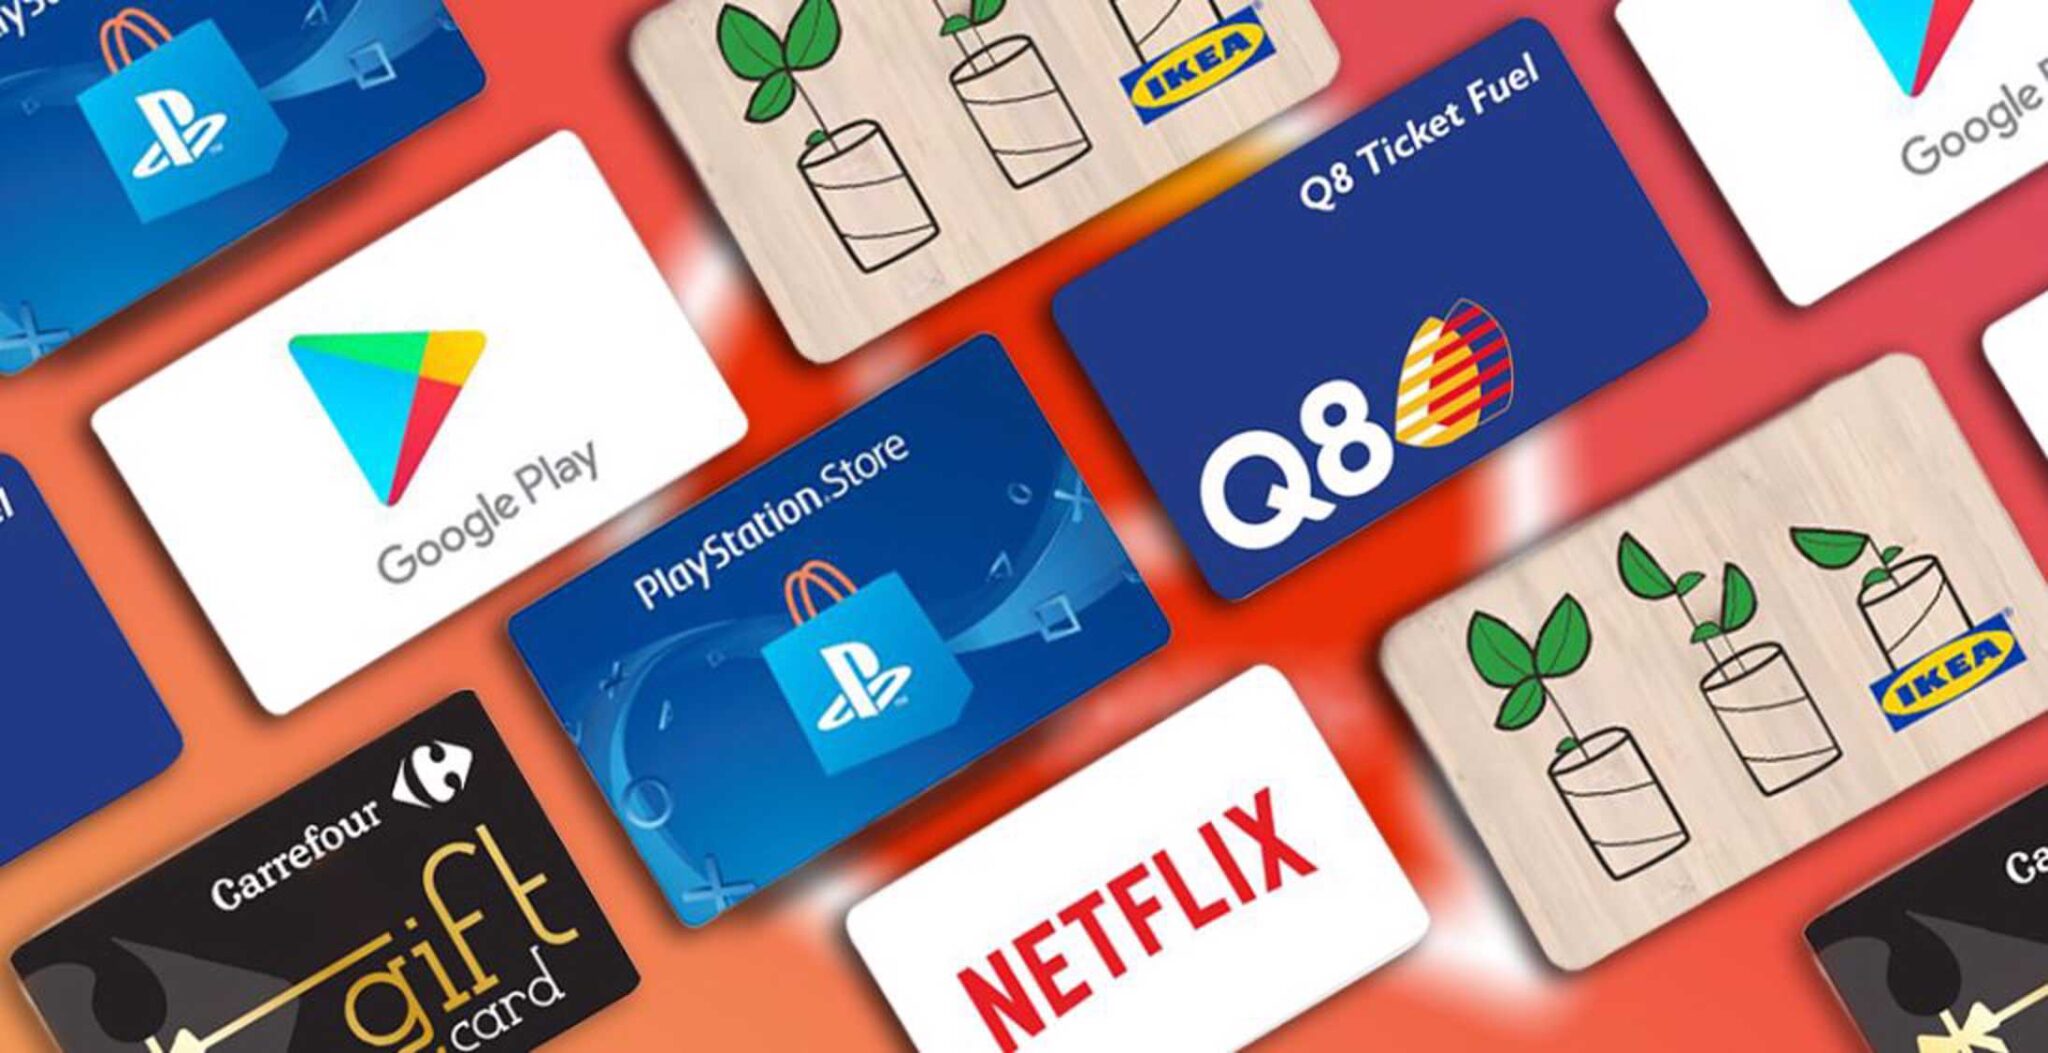 How to buy Netflix, IKEA and Carrefour Gift Cards on